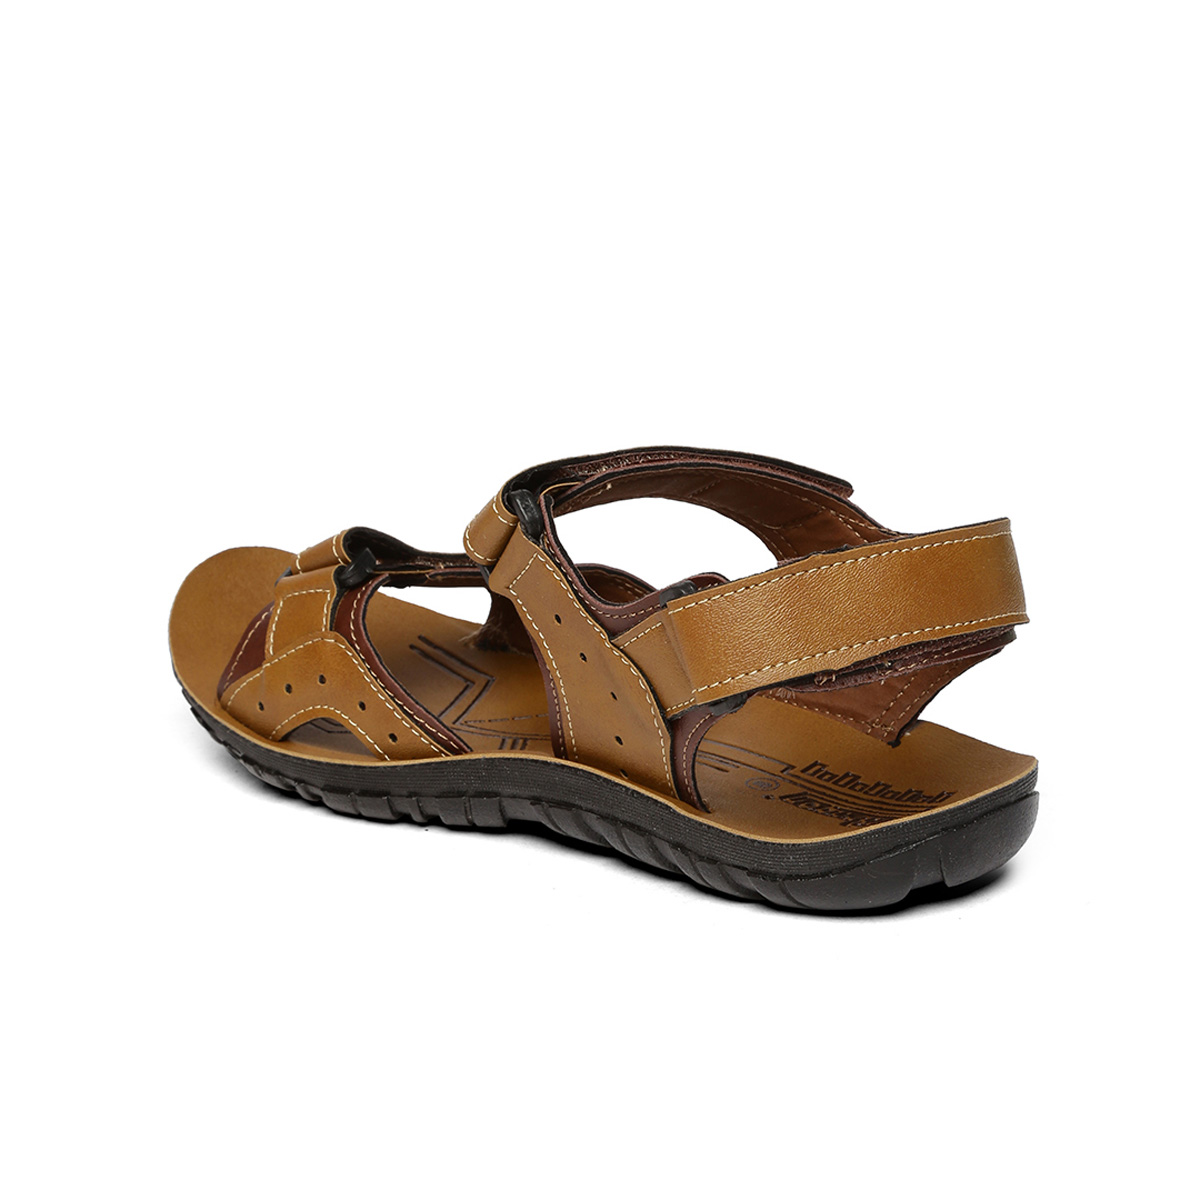 Buy Paragon-Slickers Men's Tan Slippers Online @ ₹389 from ShopClues